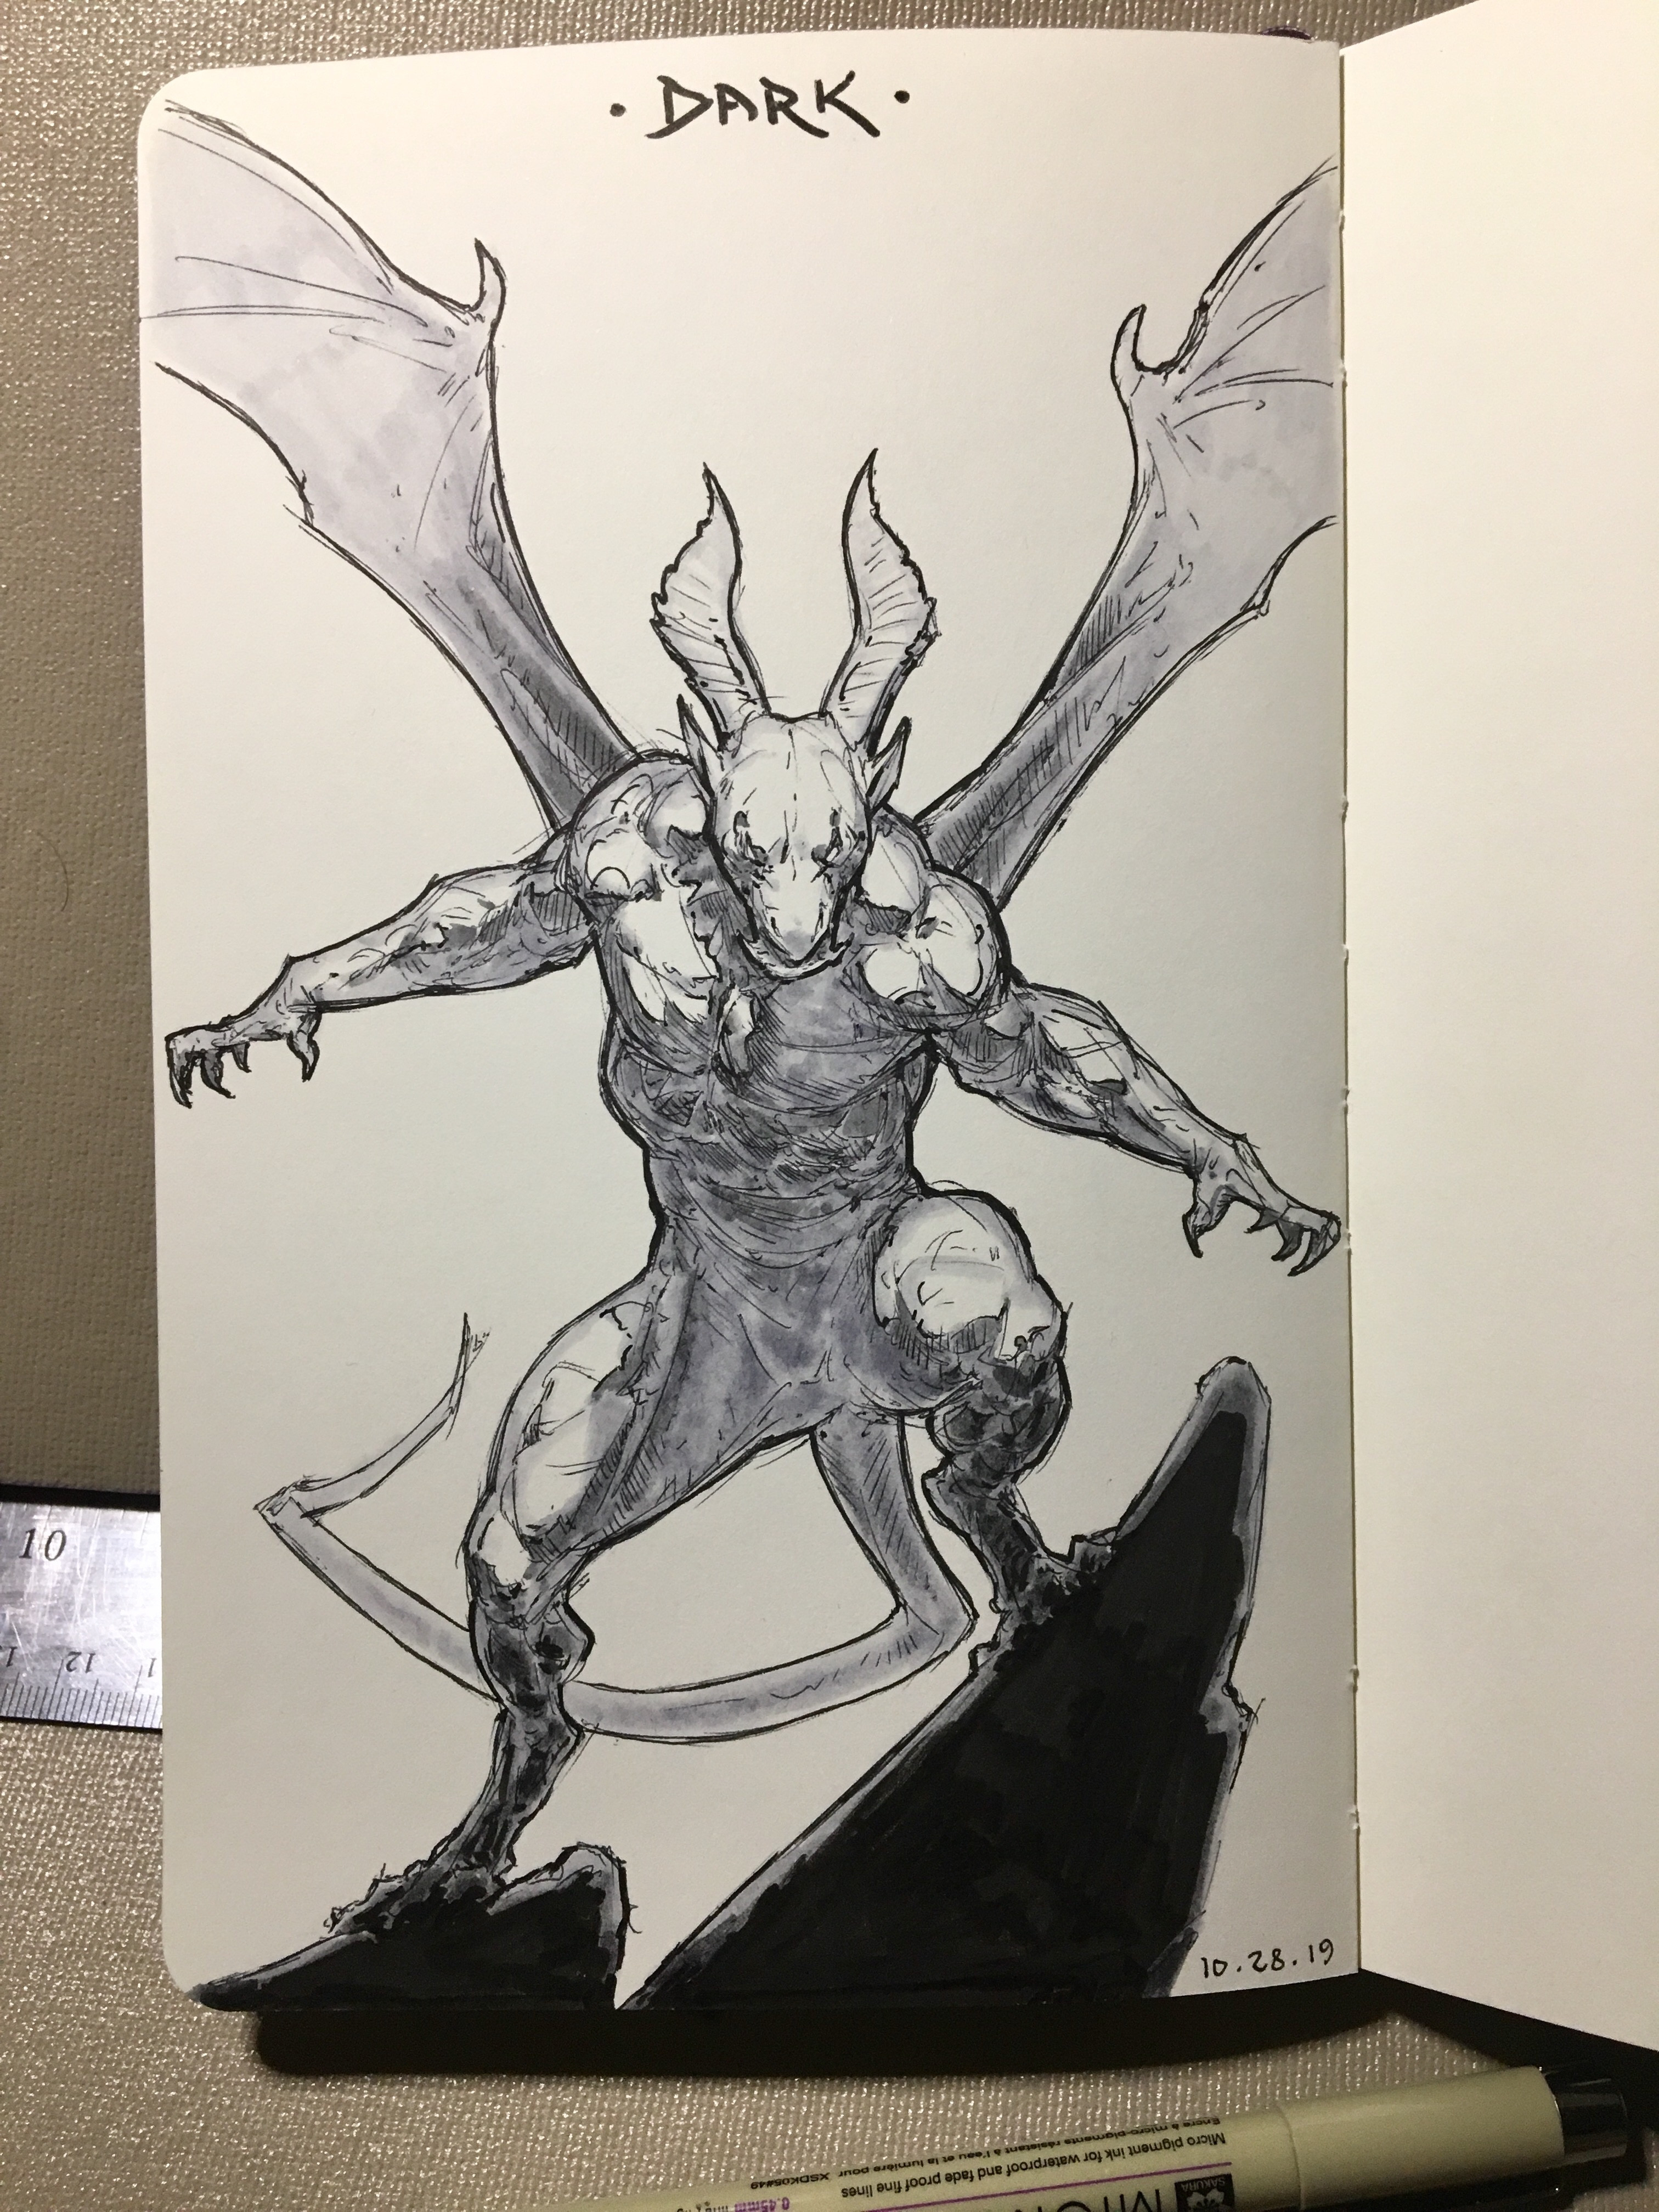 Day 26 of inktober 2019! Dark! Your next fight is against the demon in the shadows... Will you be victorious? 😨😱 